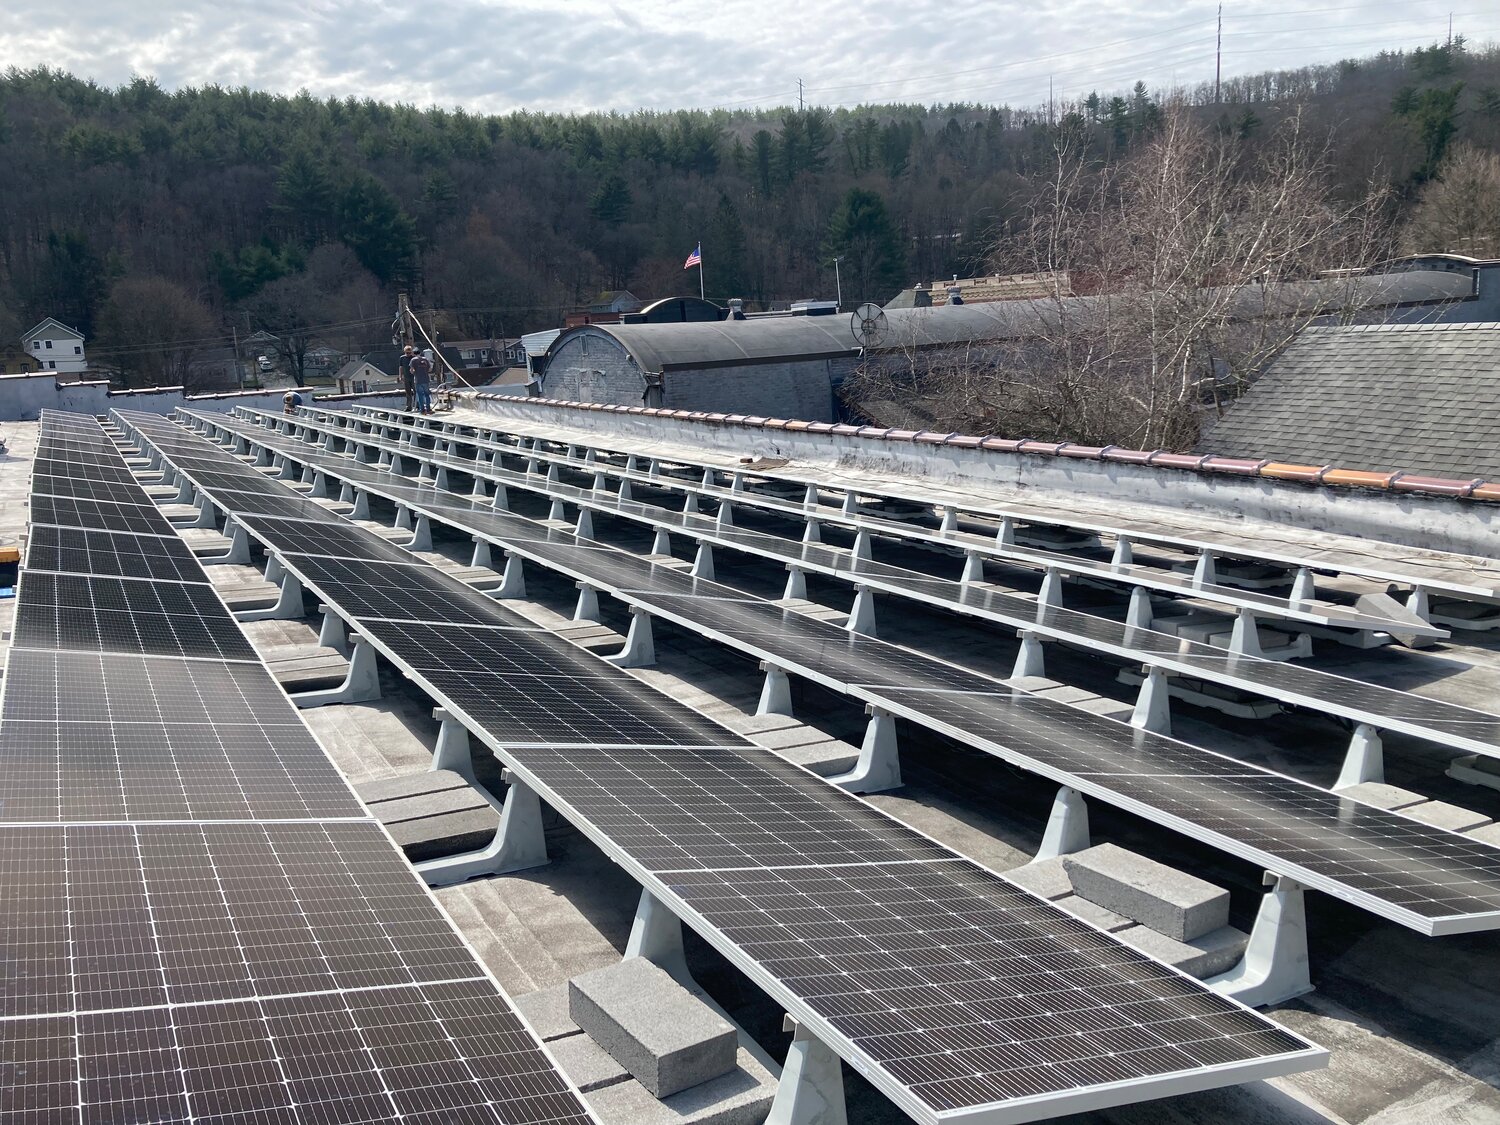 For flat or nearly-flat roofs like one on the Ritz Company Playhouse, ballasted racks for solar panels are used to avoid penetrating the roof's rubber membrane.